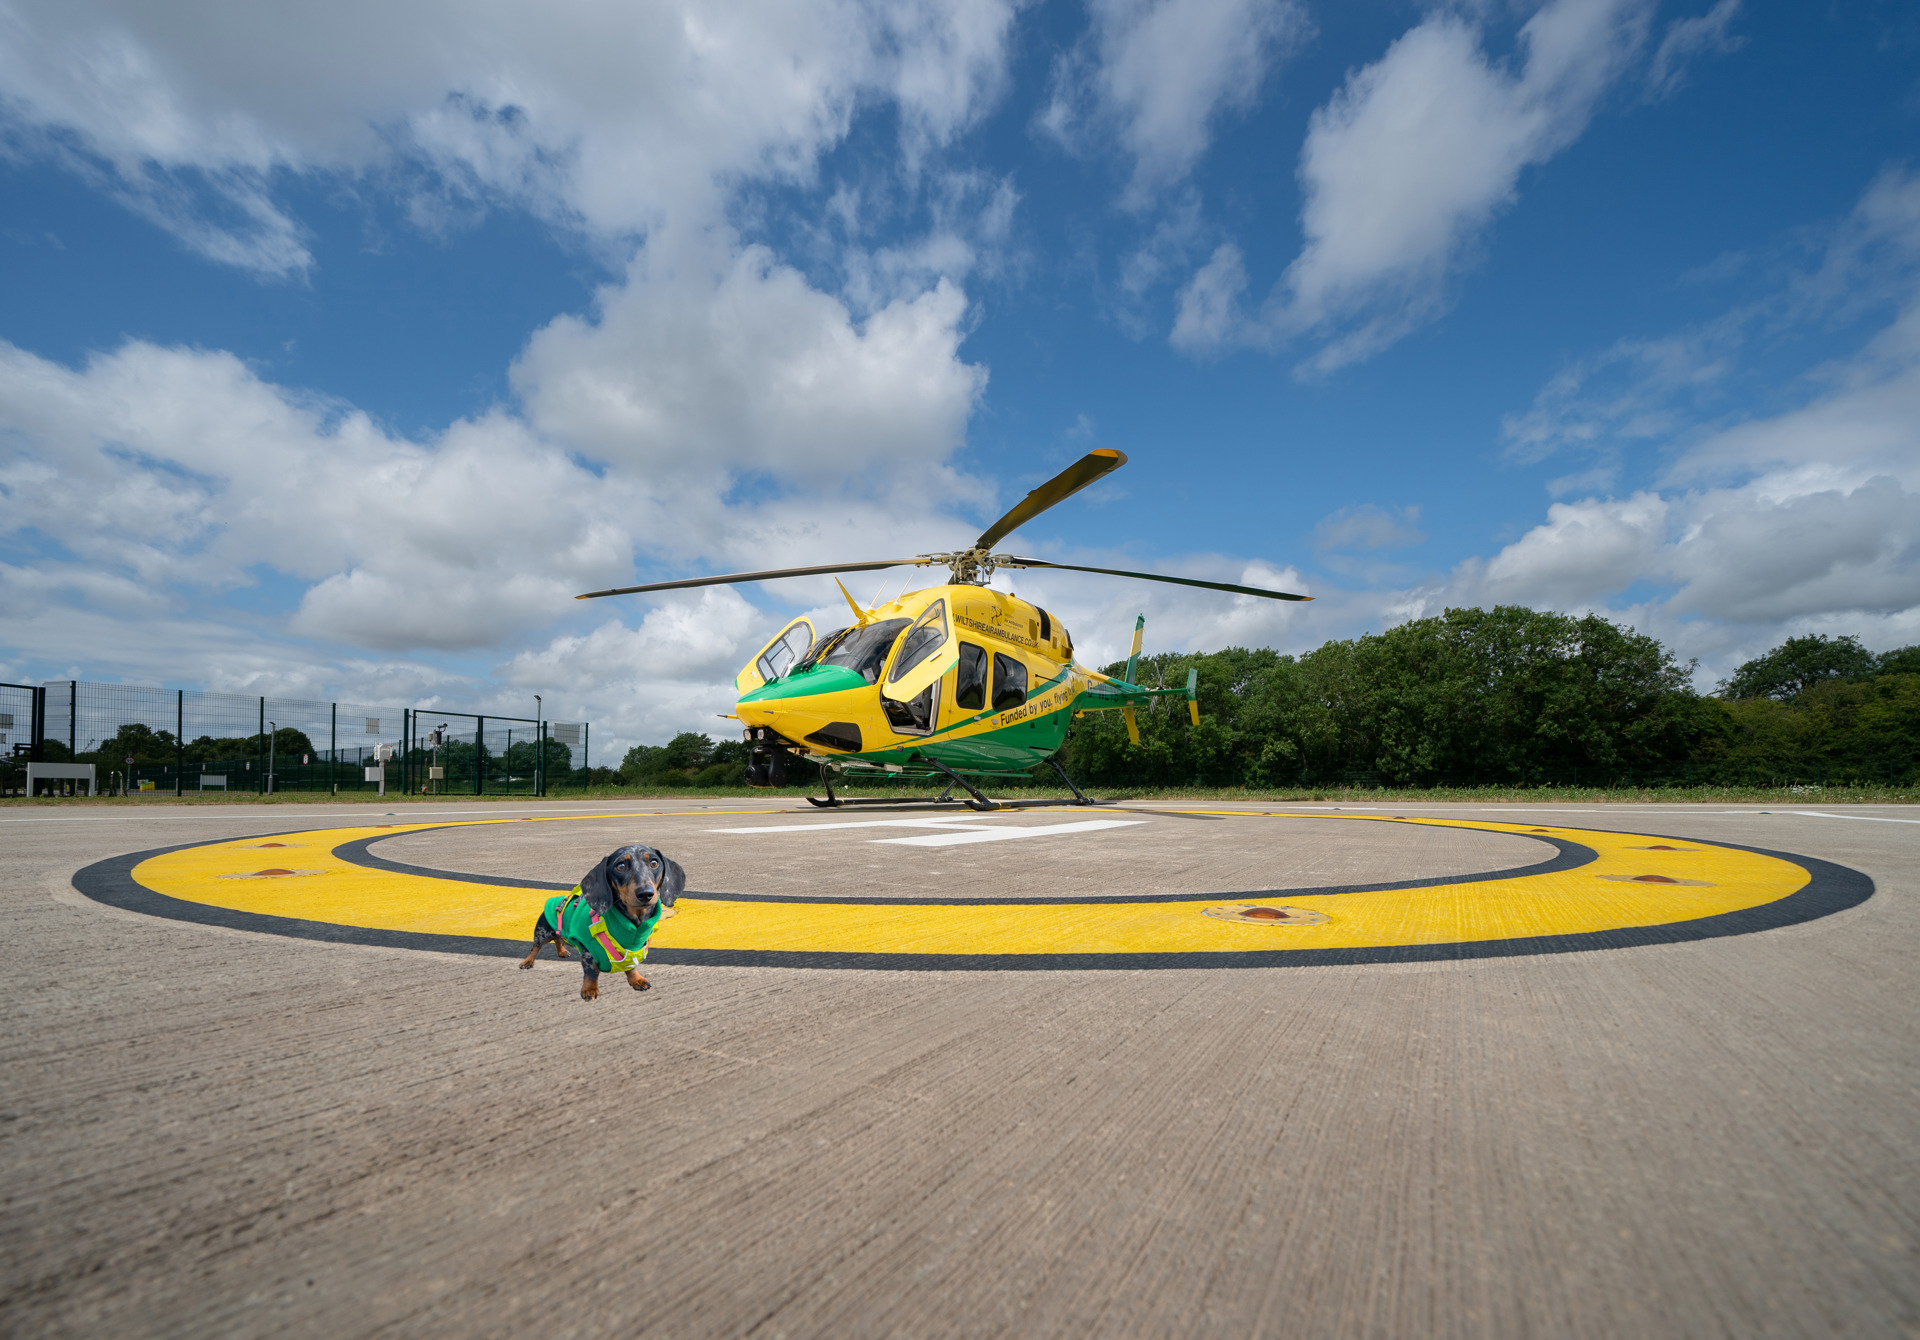 A small Dachshund photoshopped on the Wiltshire Air Ambulance helipad, with the yellow and green helicopter in the background